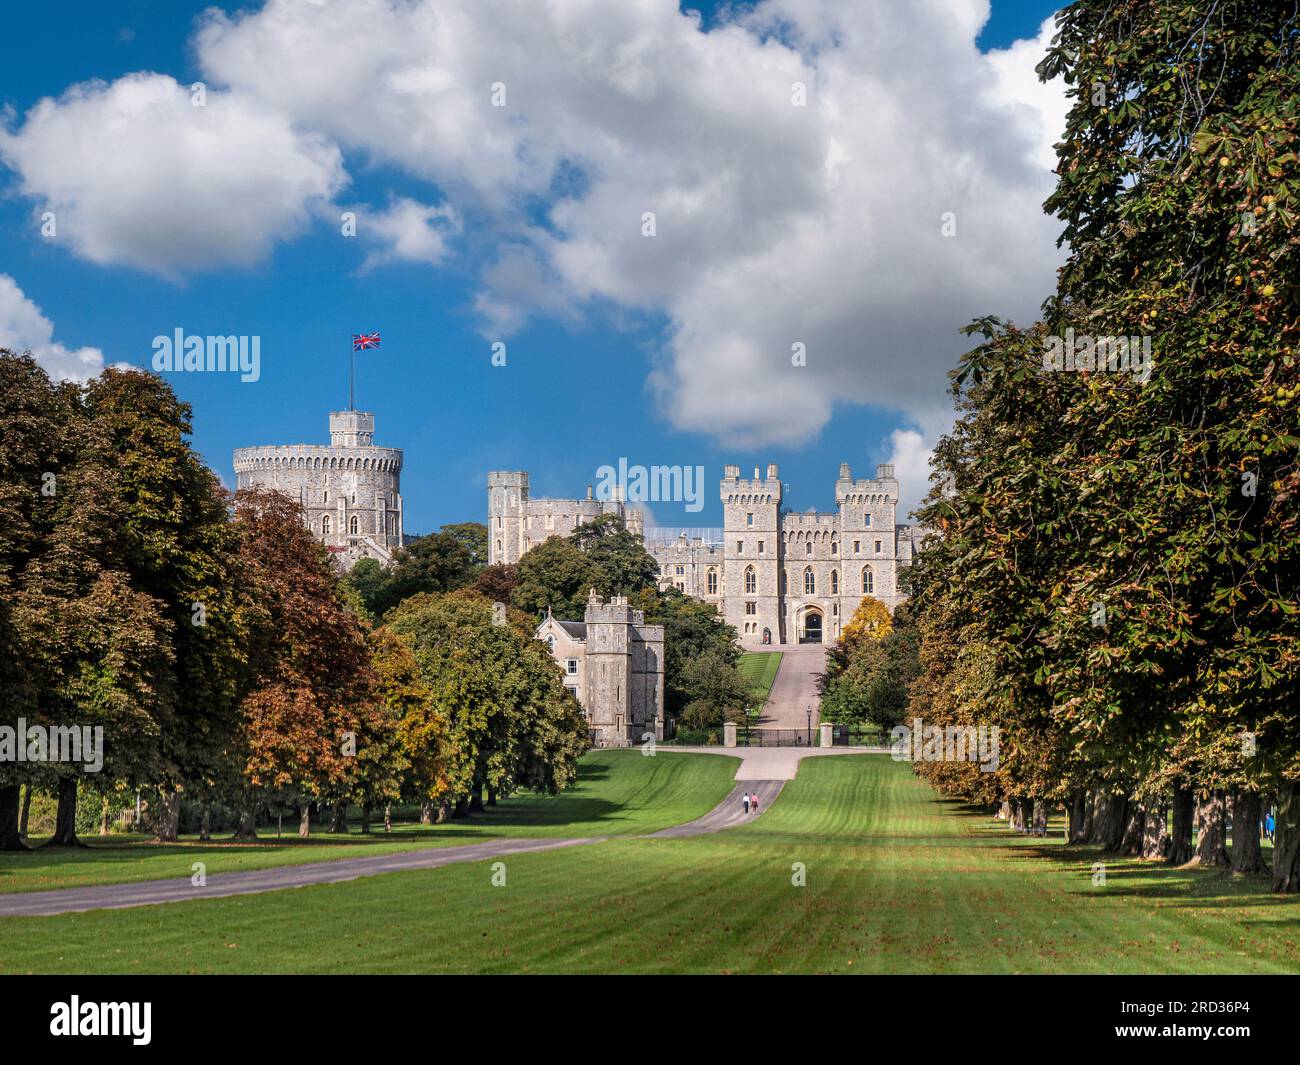 Windsor Castle and the Long Walk with Union Jack flag, in summer/autumn colour with walkers in dappled sunlight blue sky & clouds Windsor Berkshire UK Stock Photo